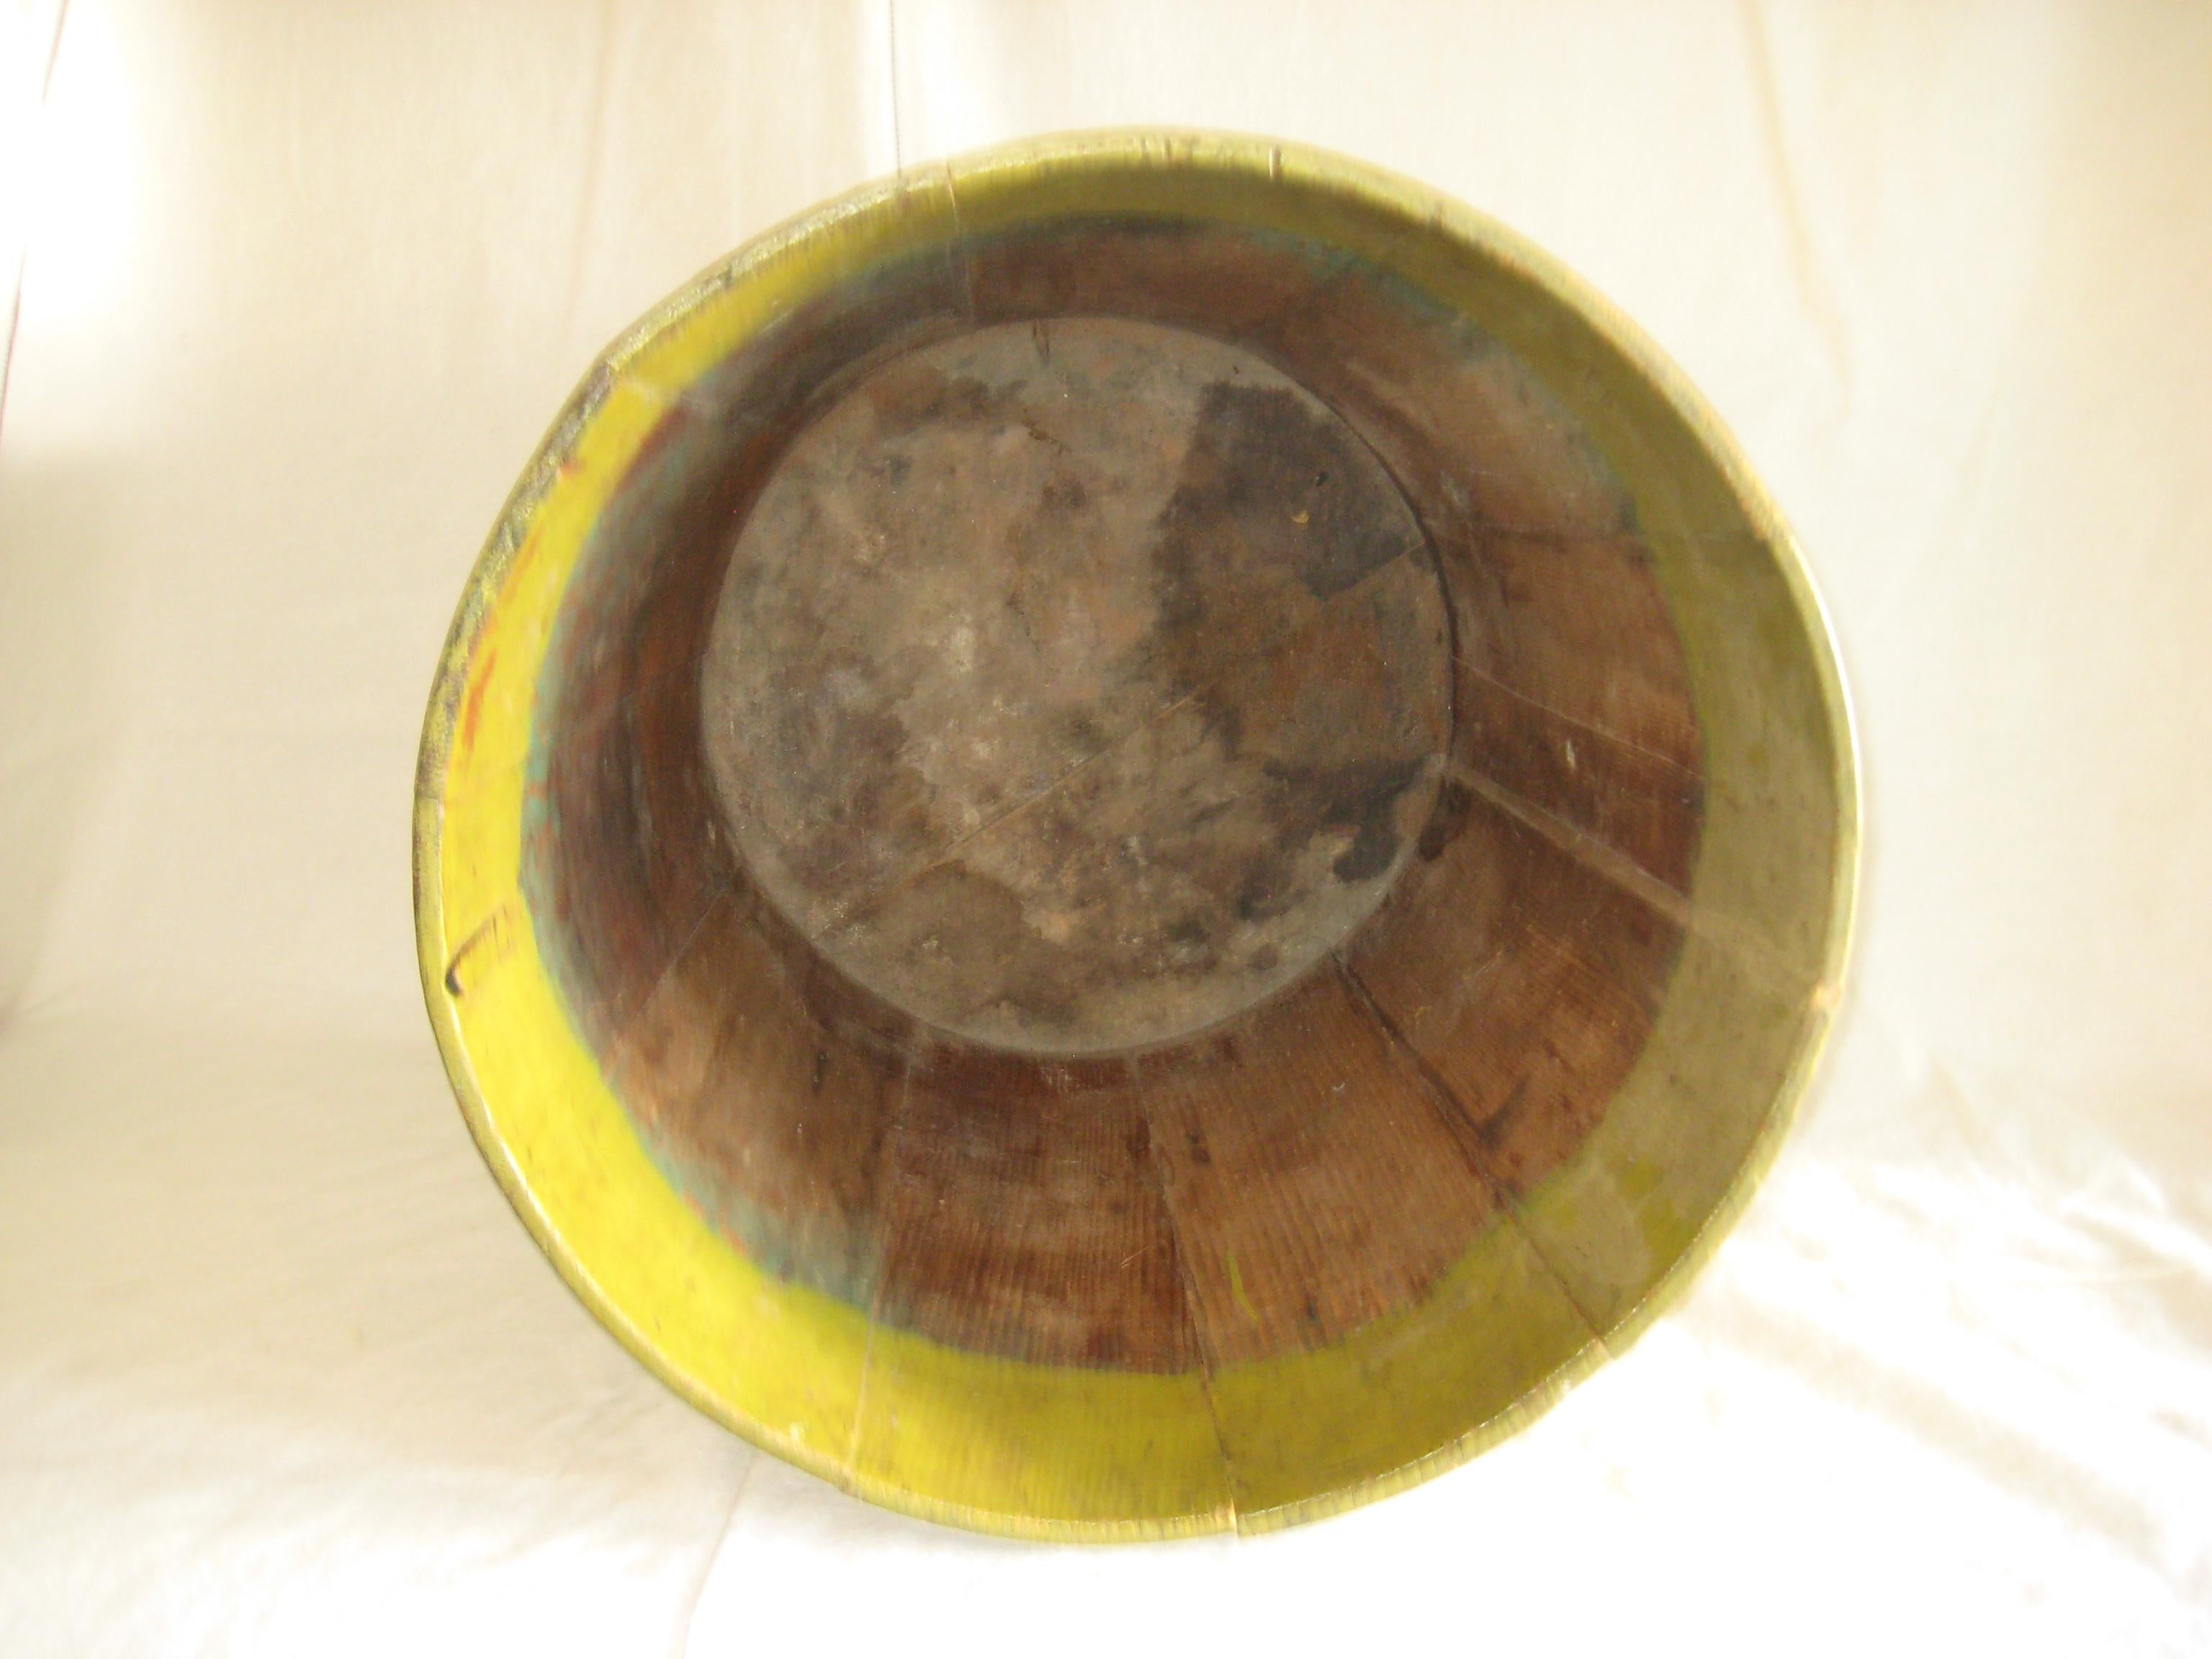 19th Century Slat Bucket in Yellow Paint In Fair Condition For Sale In Nantucket, MA